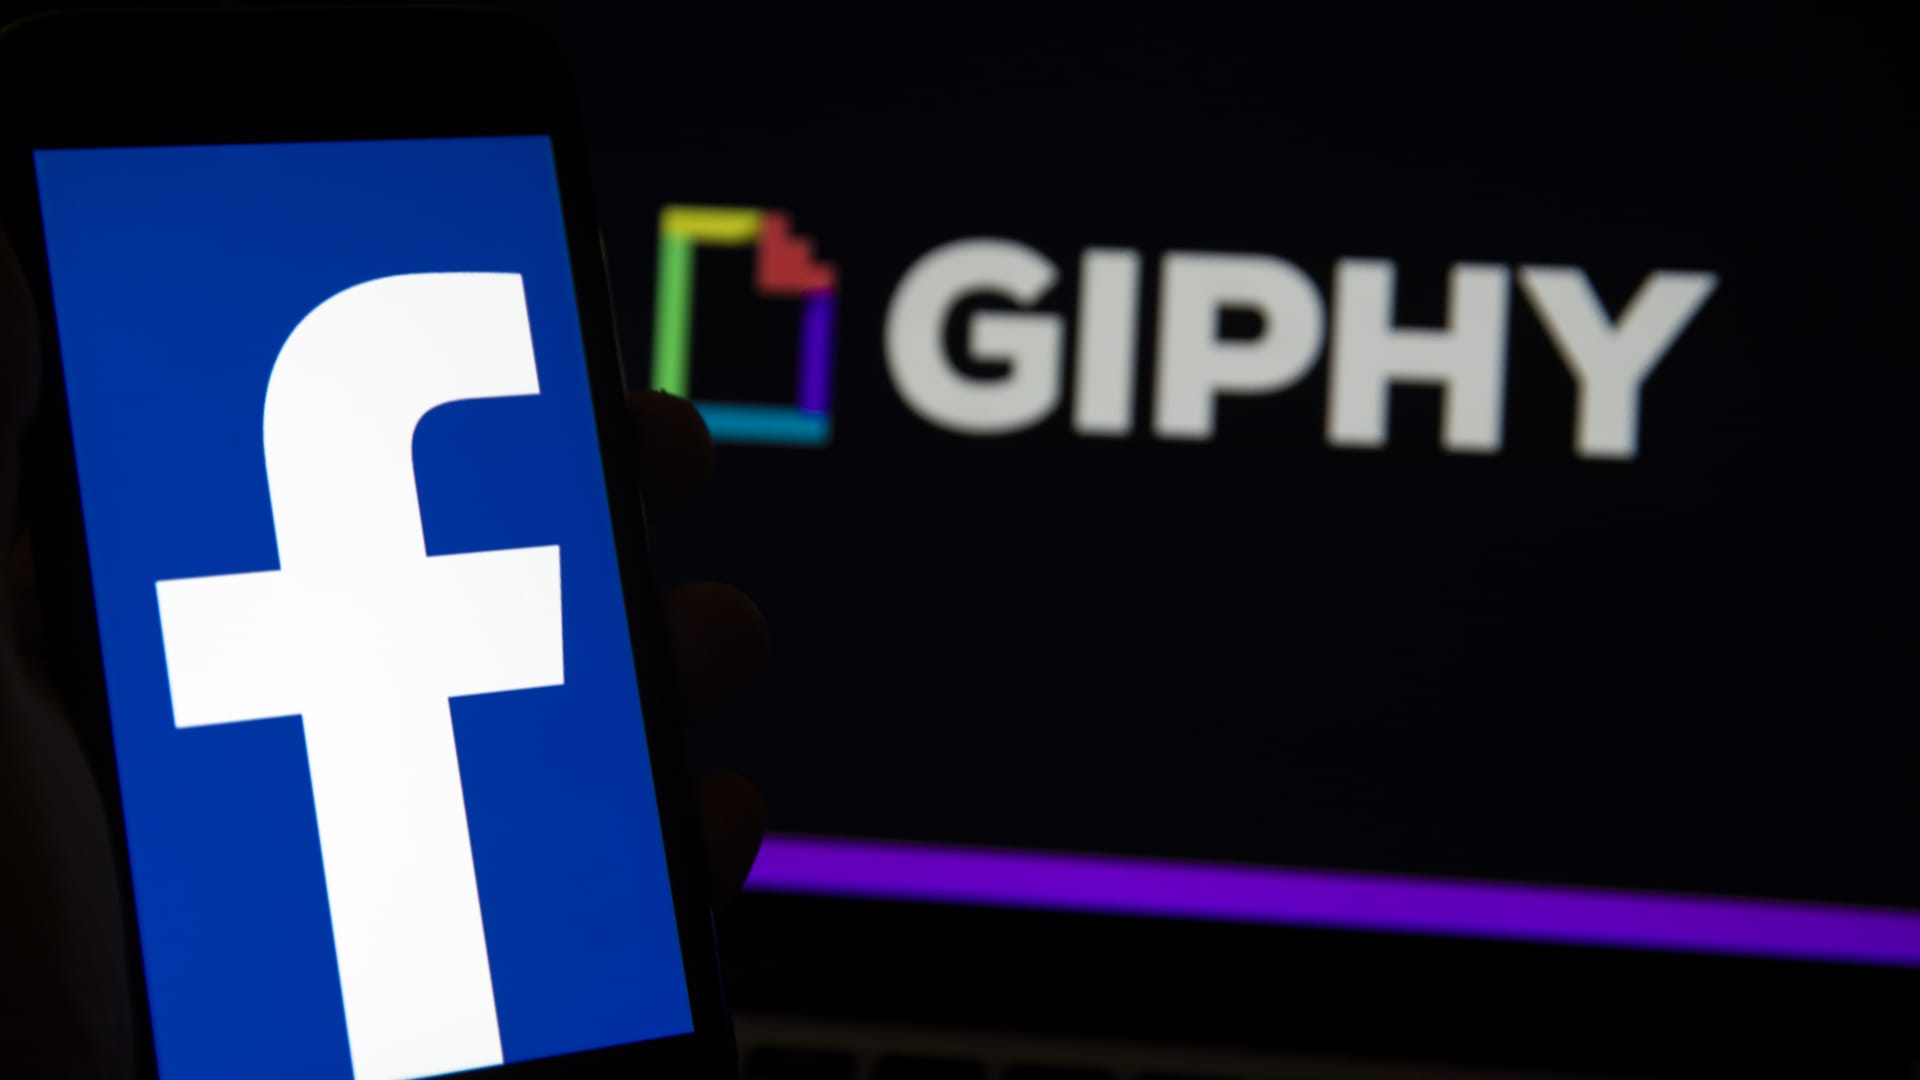 Facebook parent Meta ordered to sell Giphy by UK competition regulator